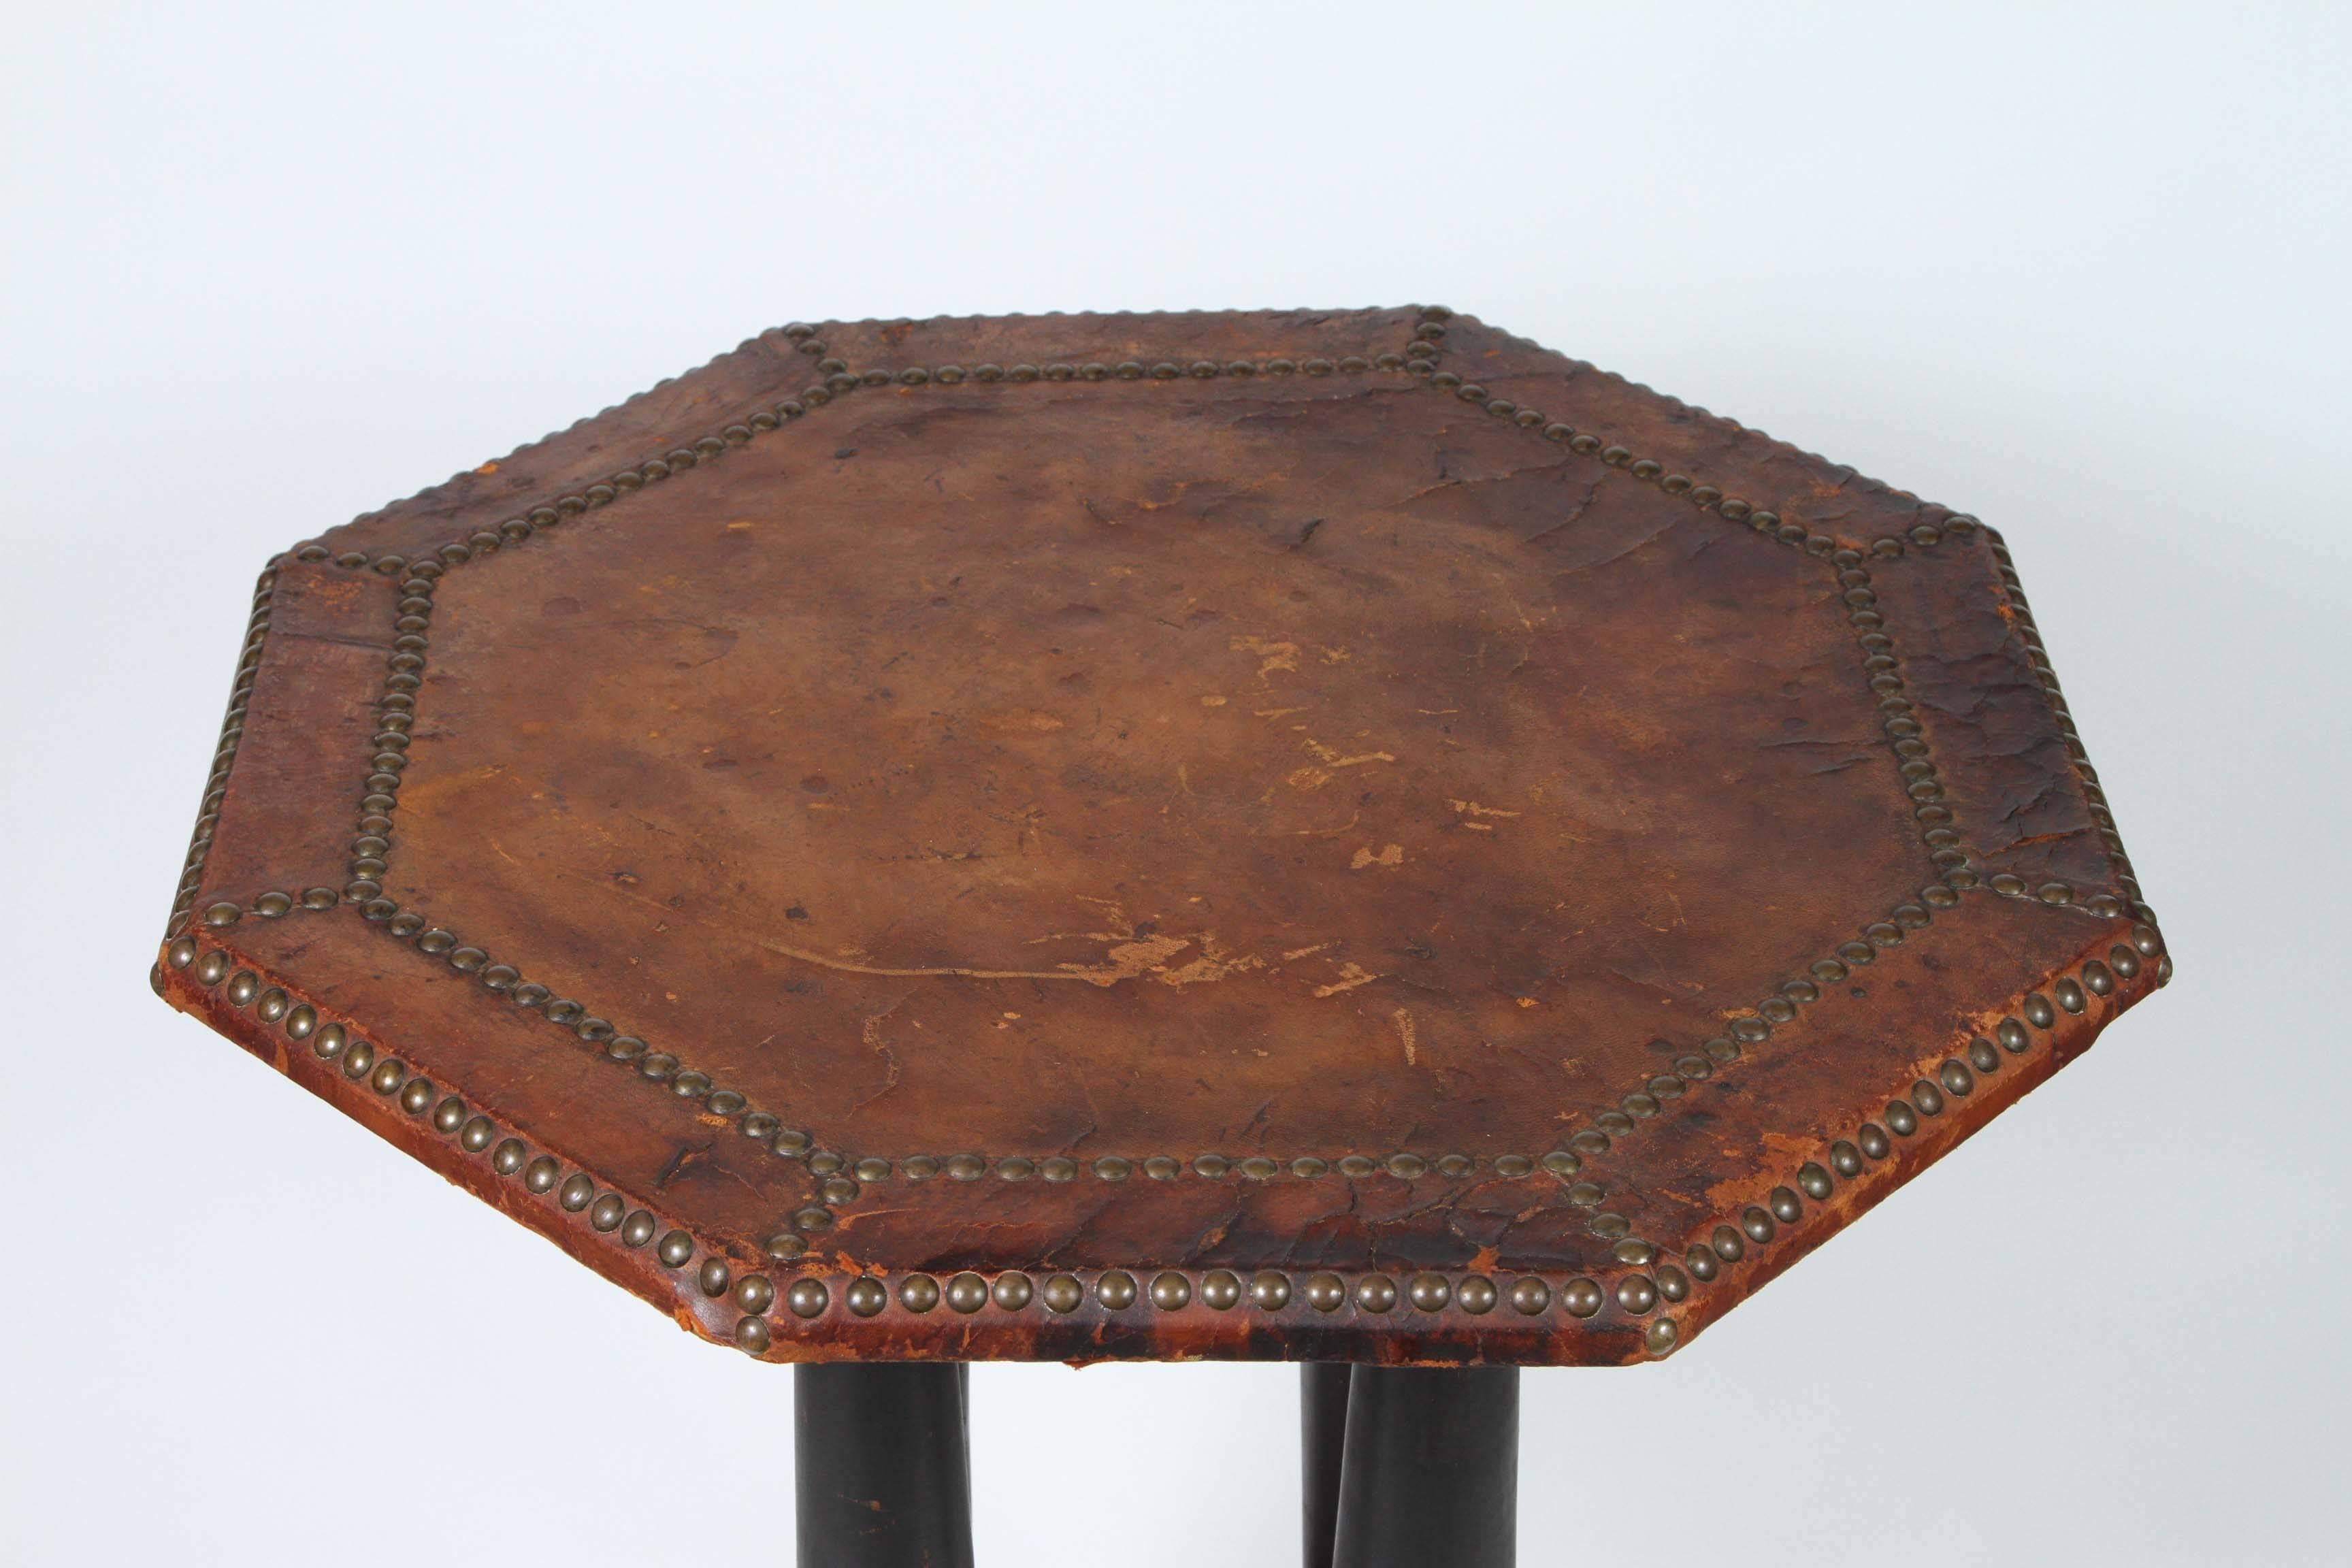 French Art Deco leather table.
Unique shape antique octagonal wood table with leather wrapped top with studded detail that sits on four tapered black pedestals that connect to a smaller octagonal base also covered in a studded leather.
Great